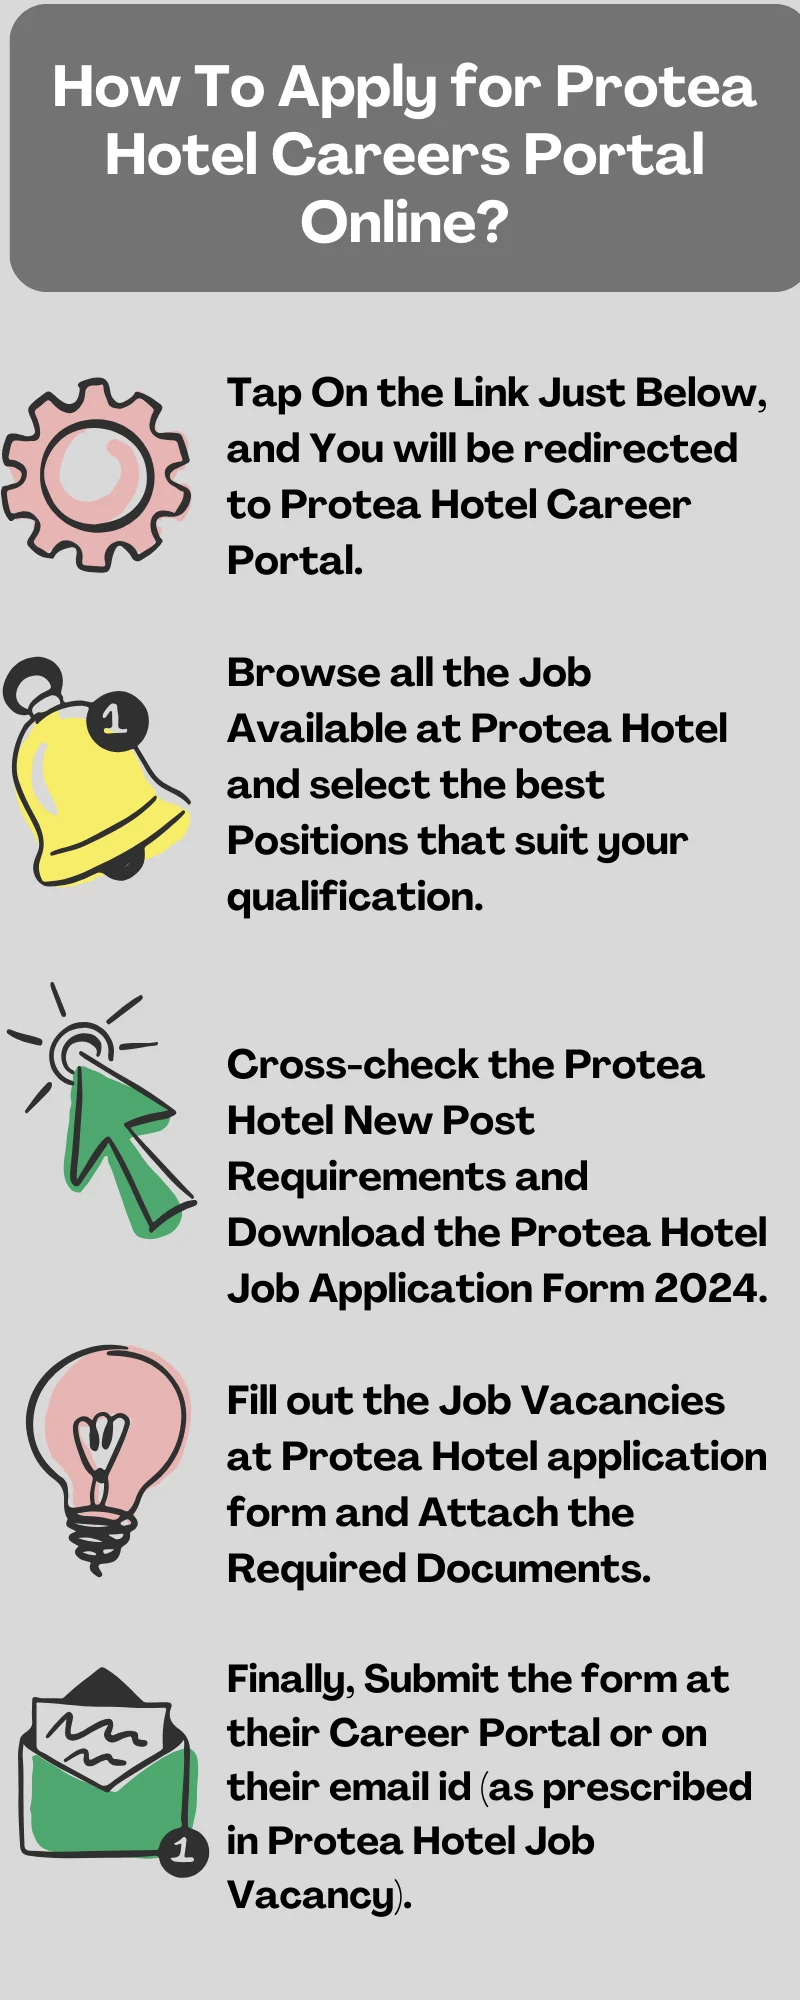 How To Apply for Protea Hotel Careers Portal Online?